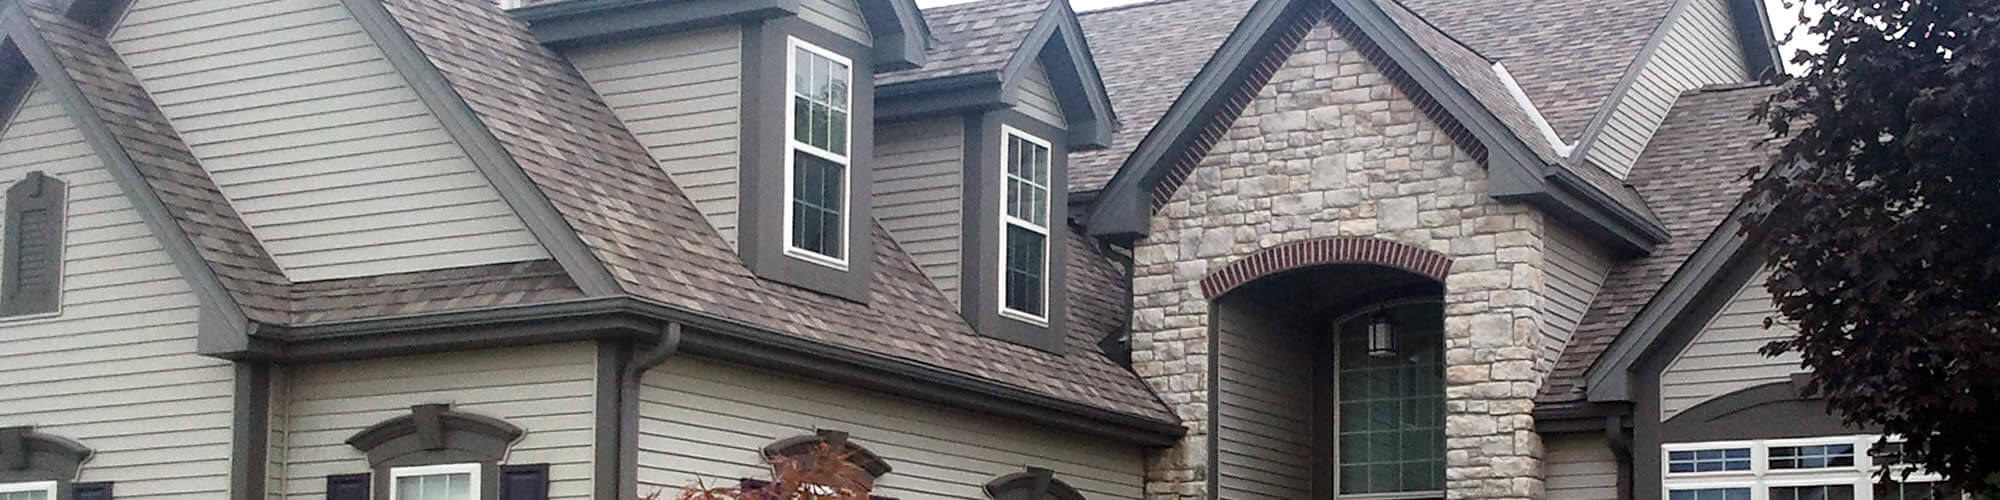 Metal Roofing Contractor near me